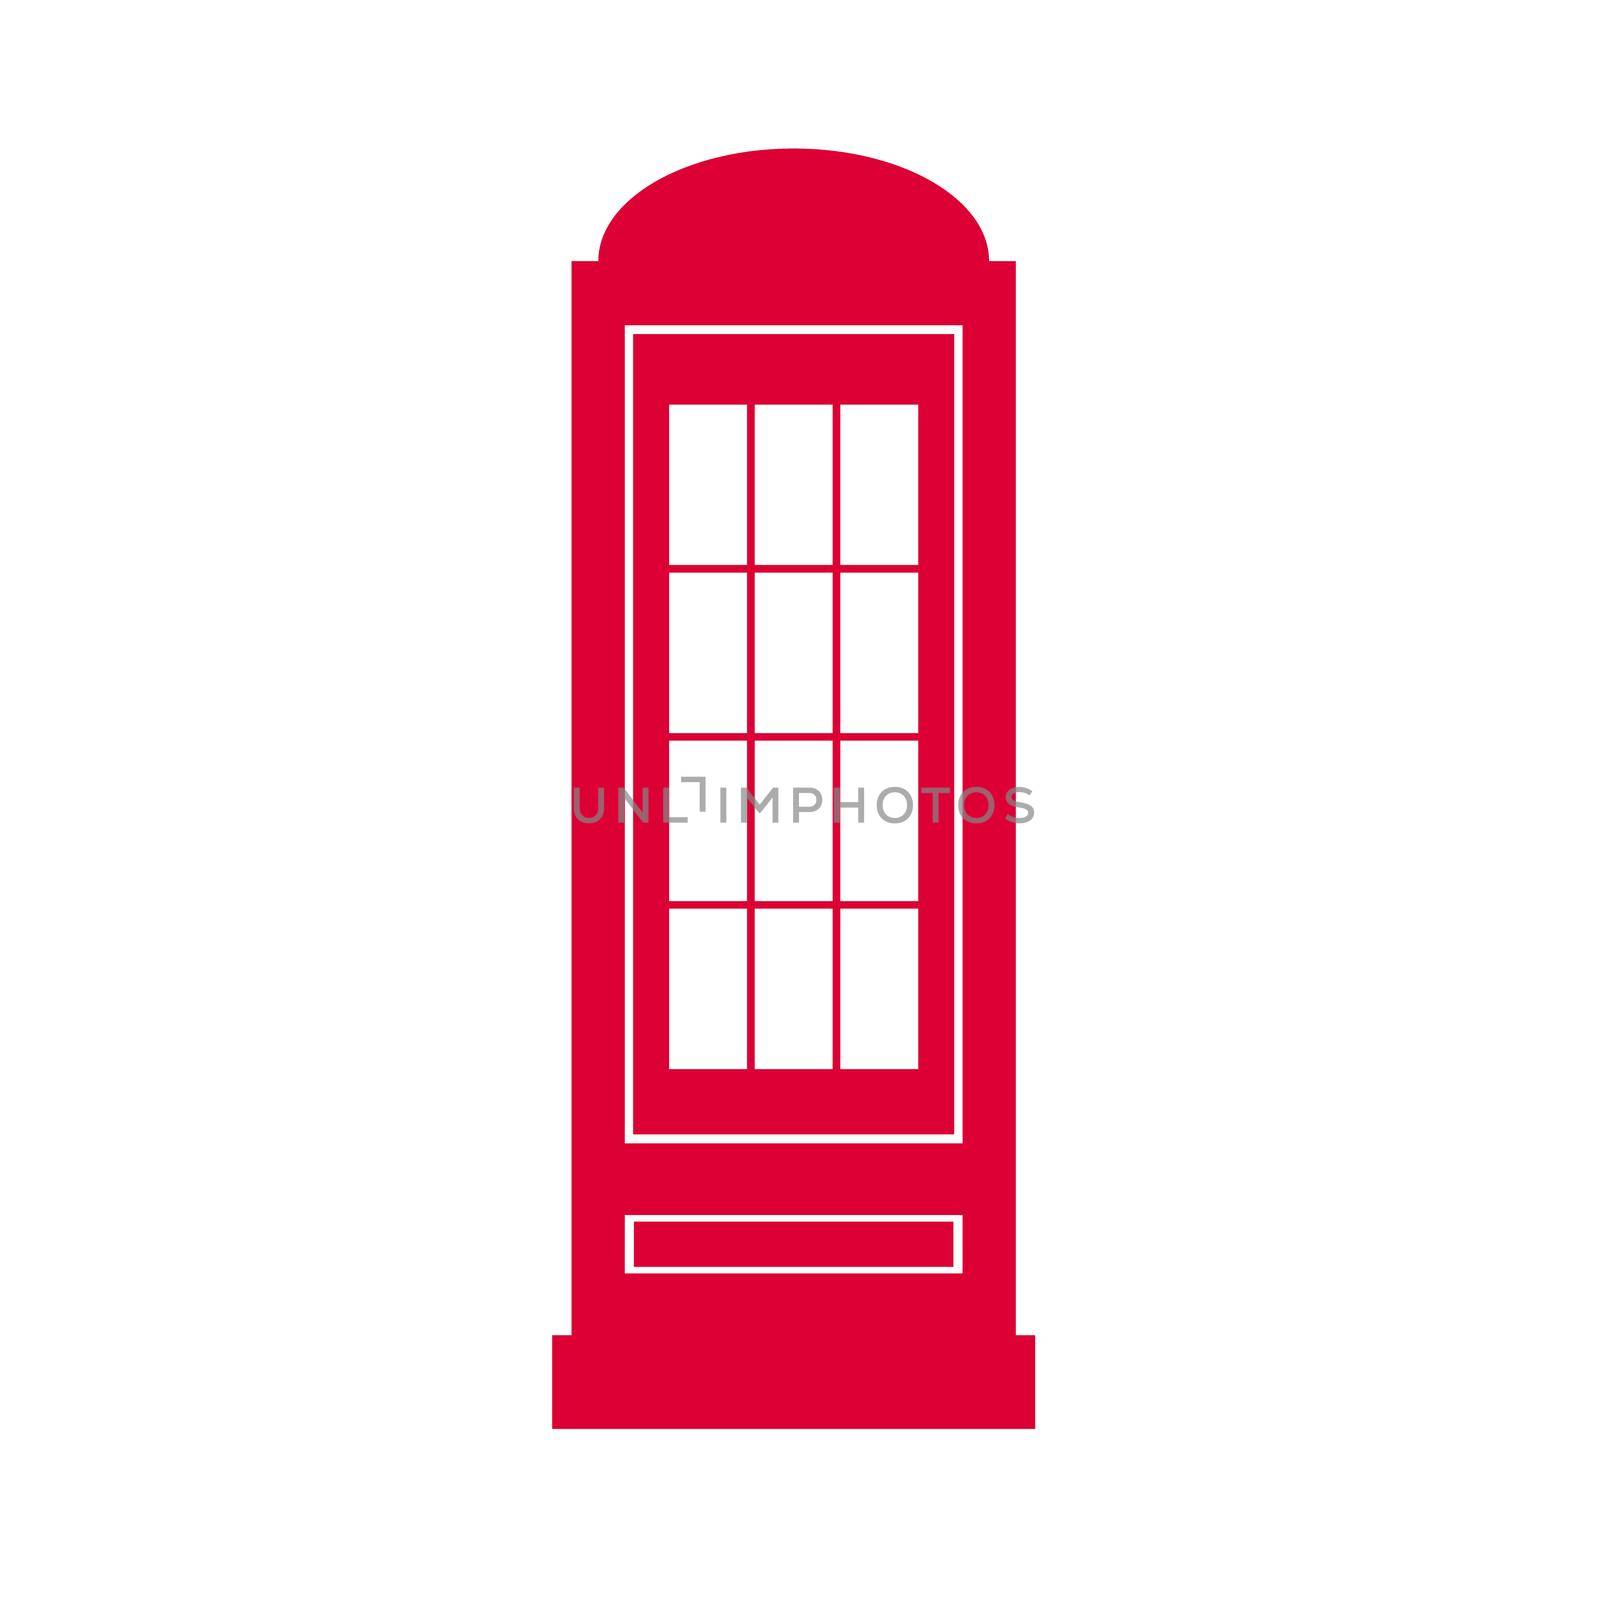 Telephone booth in London. Simple red icon on white. For your design